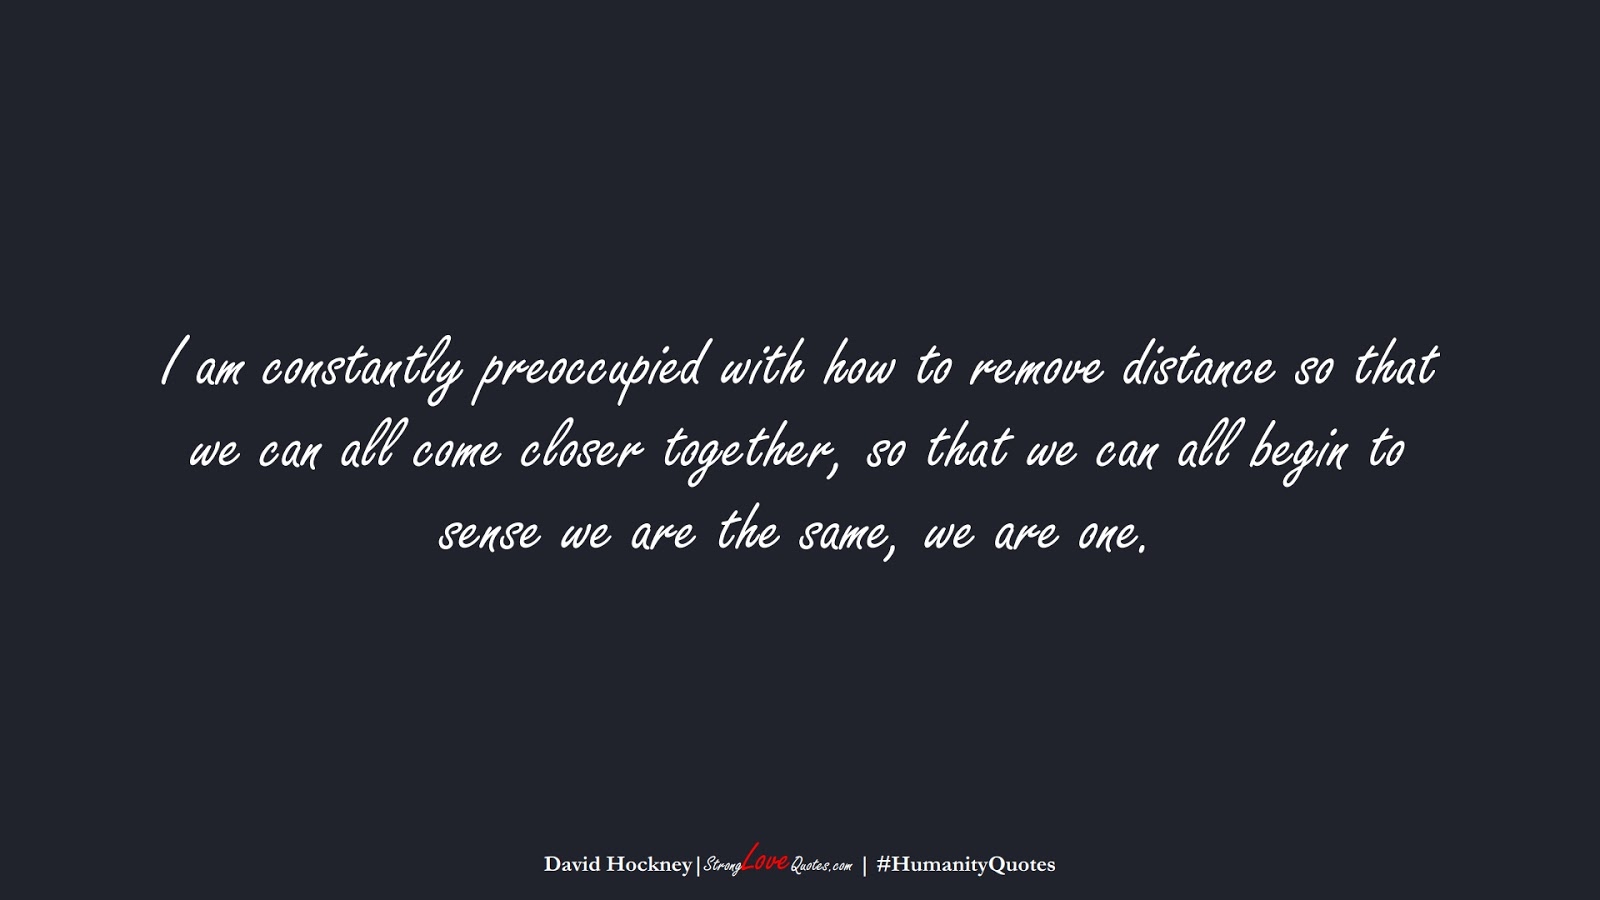 I am constantly preoccupied with how to remove distance so that we can all come closer together, so that we can all begin to sense we are the same, we are one. (David Hockney);  #HumanityQuotes